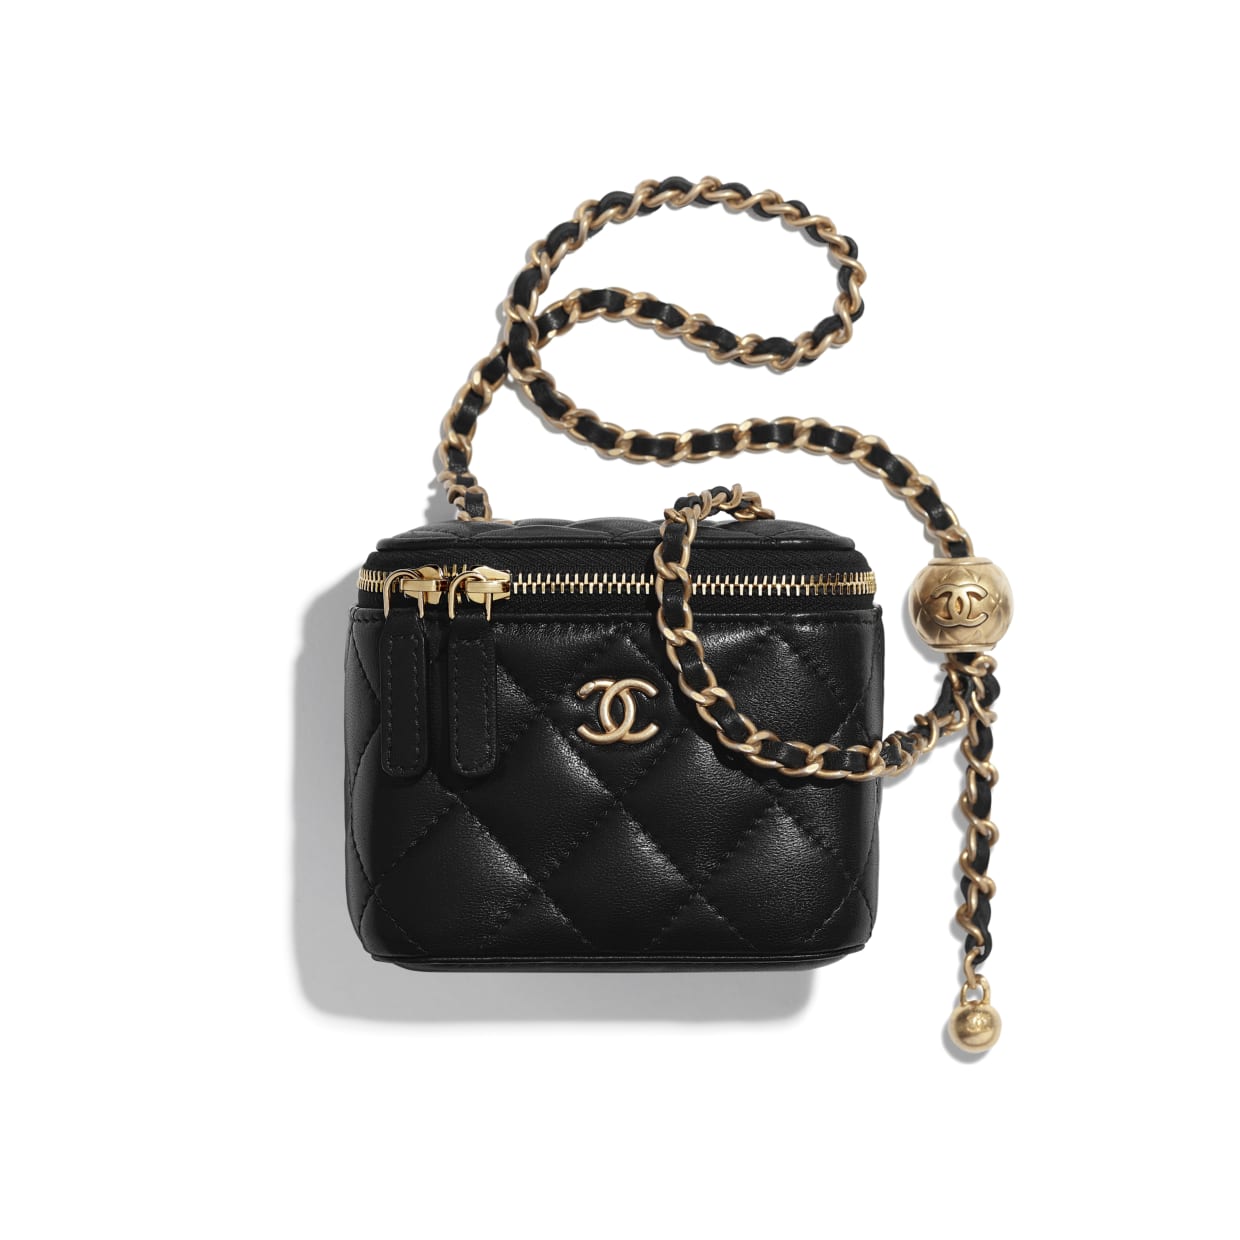 Preview Chanel's SS21 Collection of Small Leather Goods